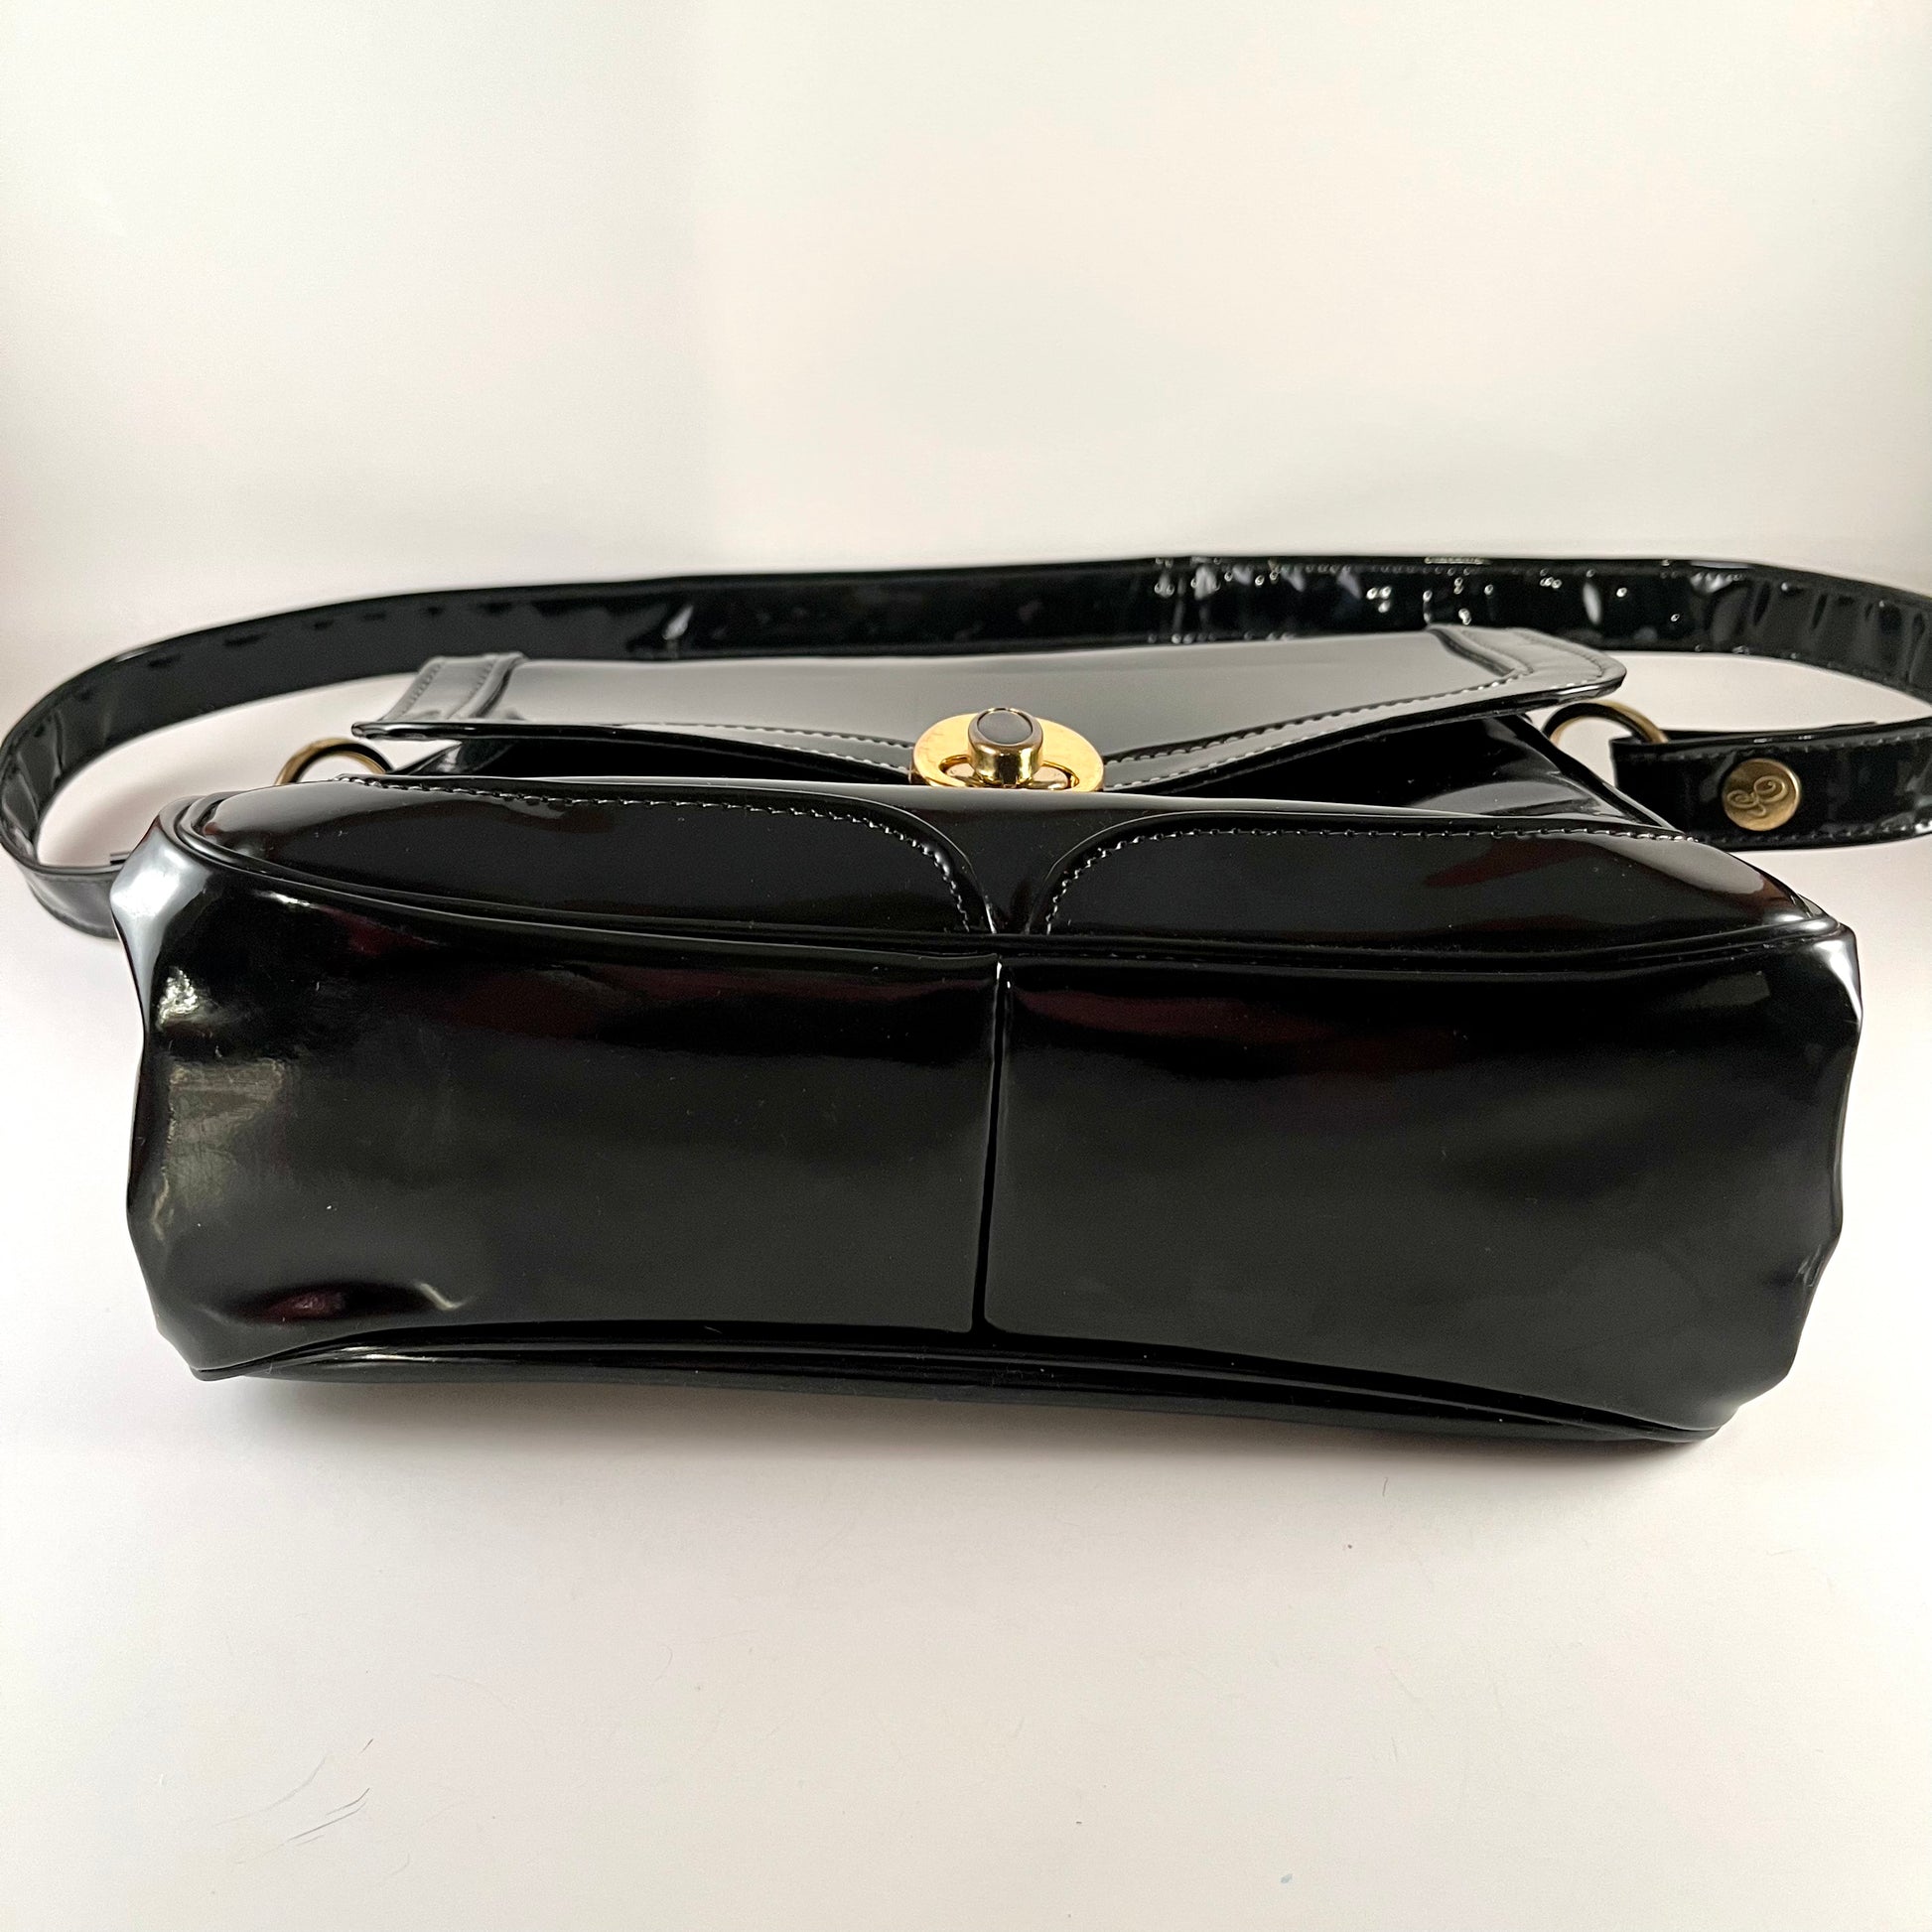 A 1960s Vintage Gucci Black Patent Leather Handbag with Gold Hardware